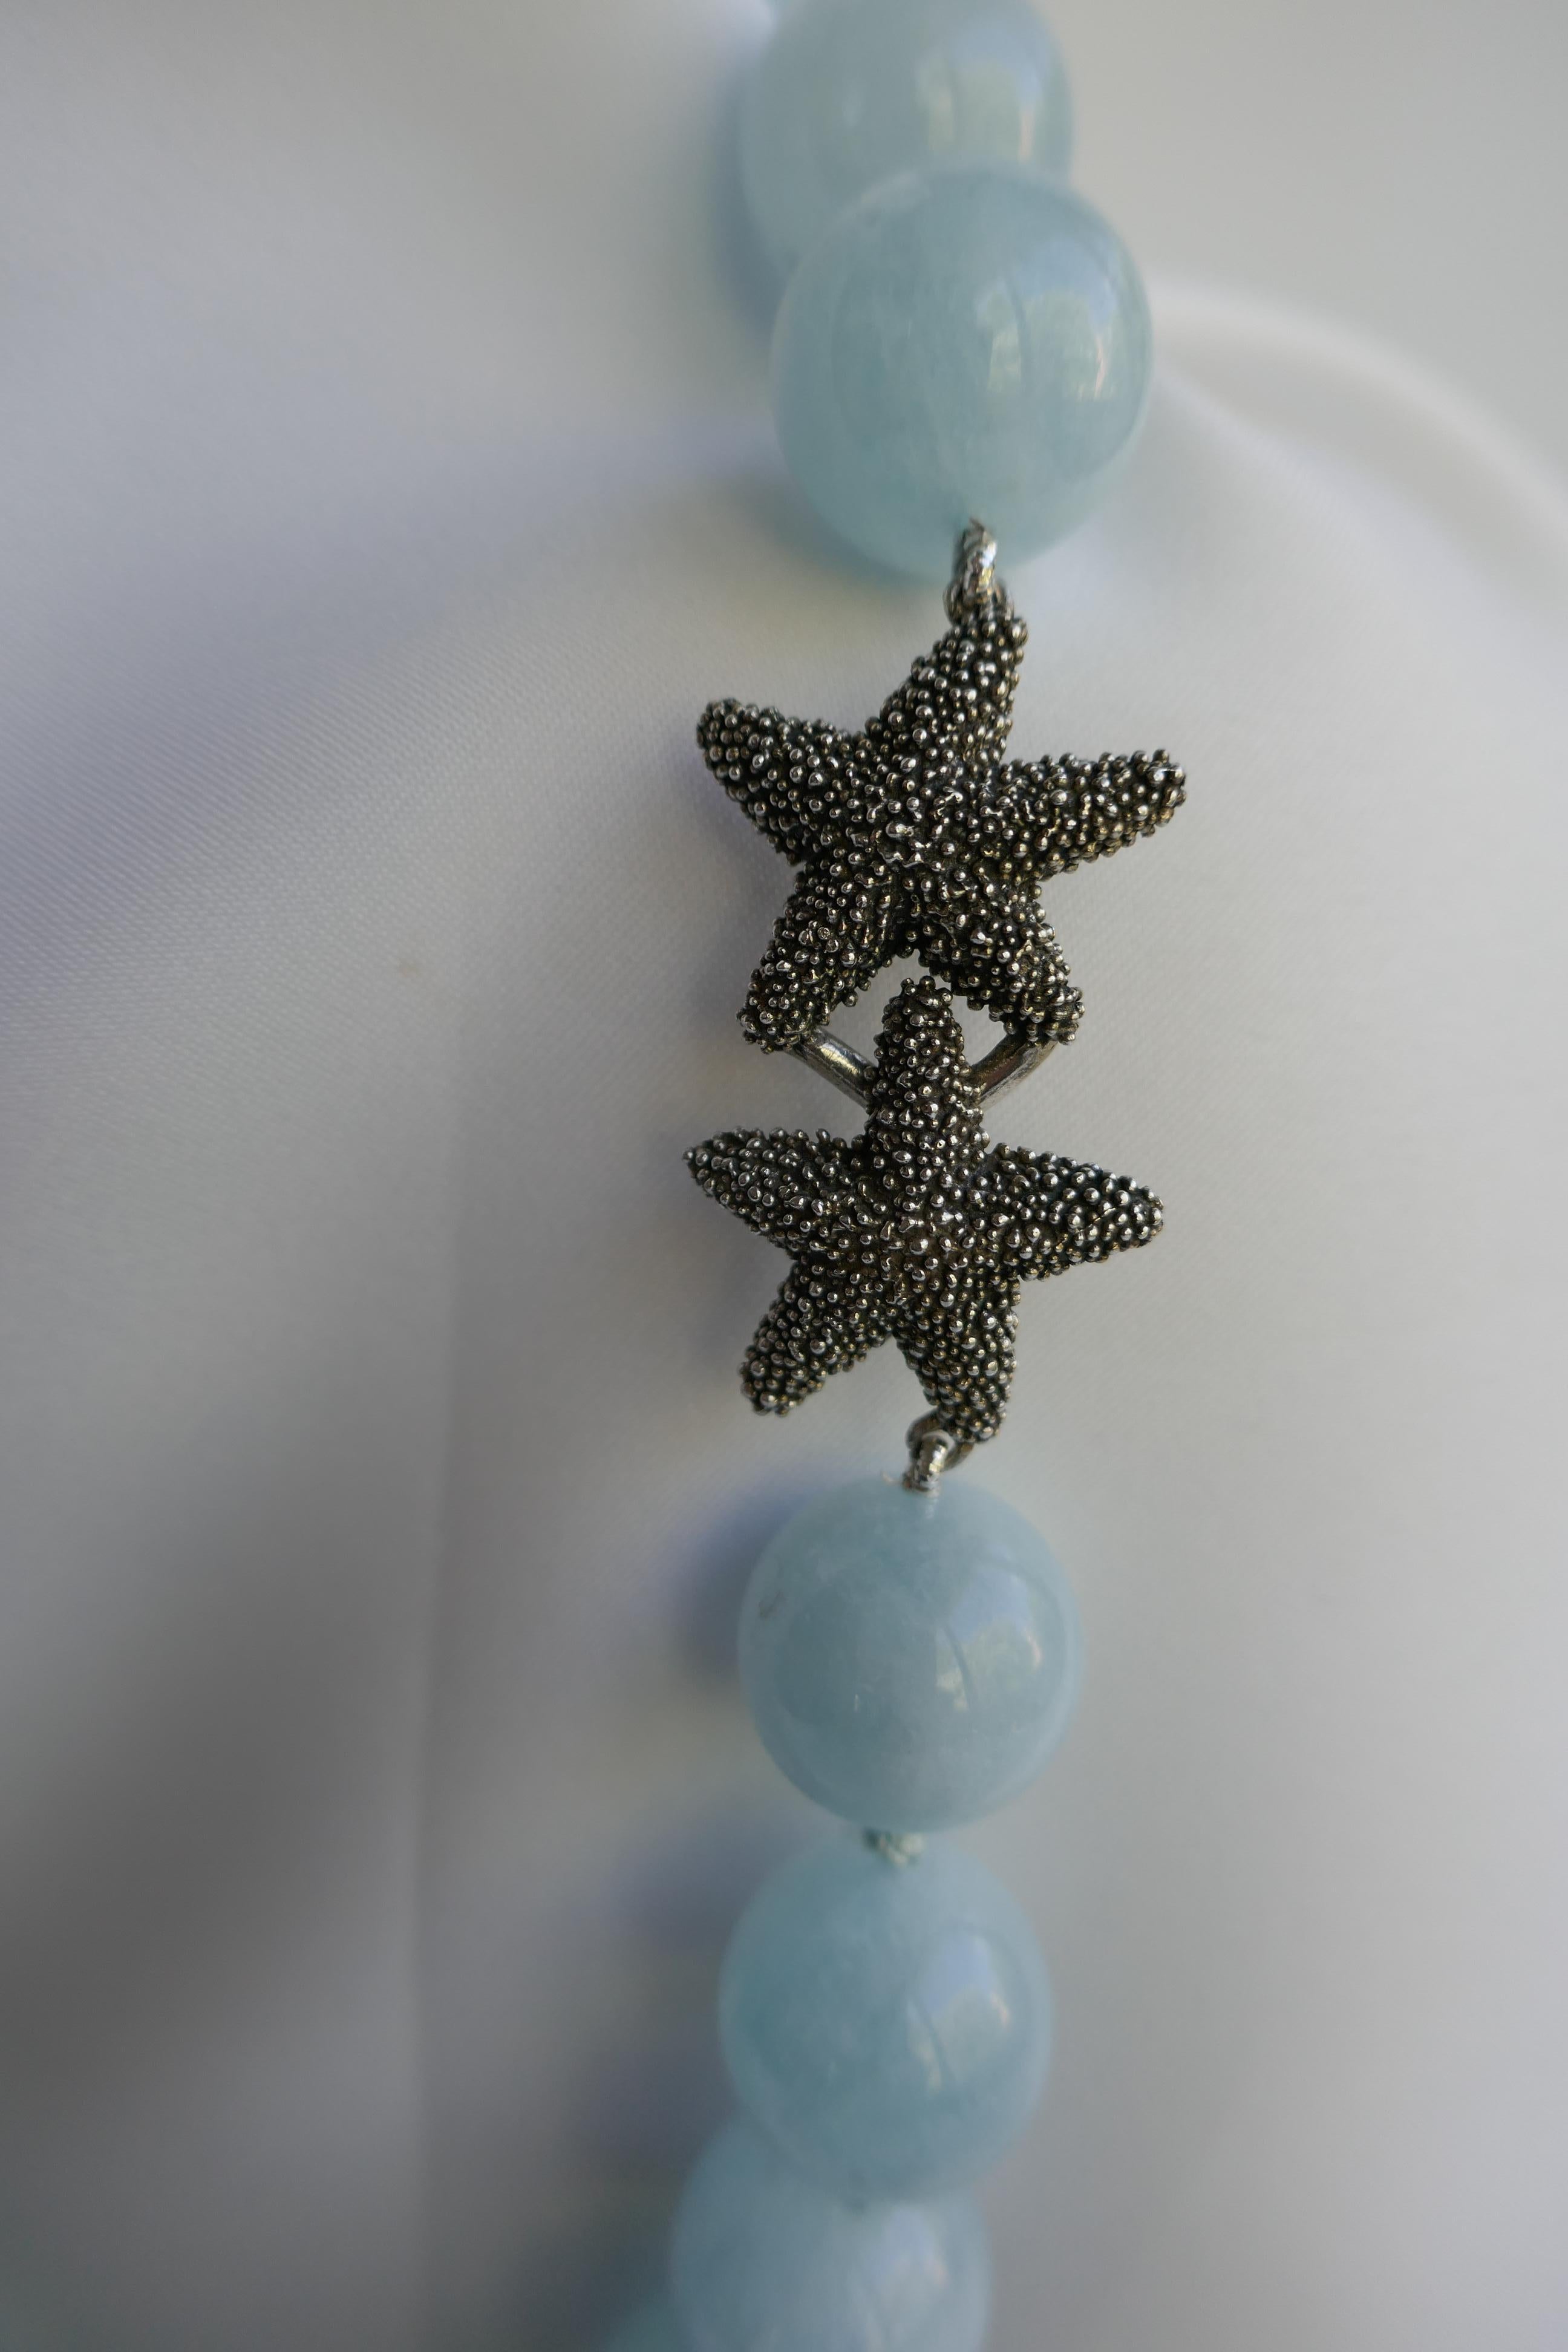 The aquamarine beads are 18-19mm. The color is exquisite.  It is individually knotted with aqua color silk thread. It was an exclusive 925 oxidized sterling starfish clasp. The necklace was designed and created by Lucy de la Vega/de la Vega designs